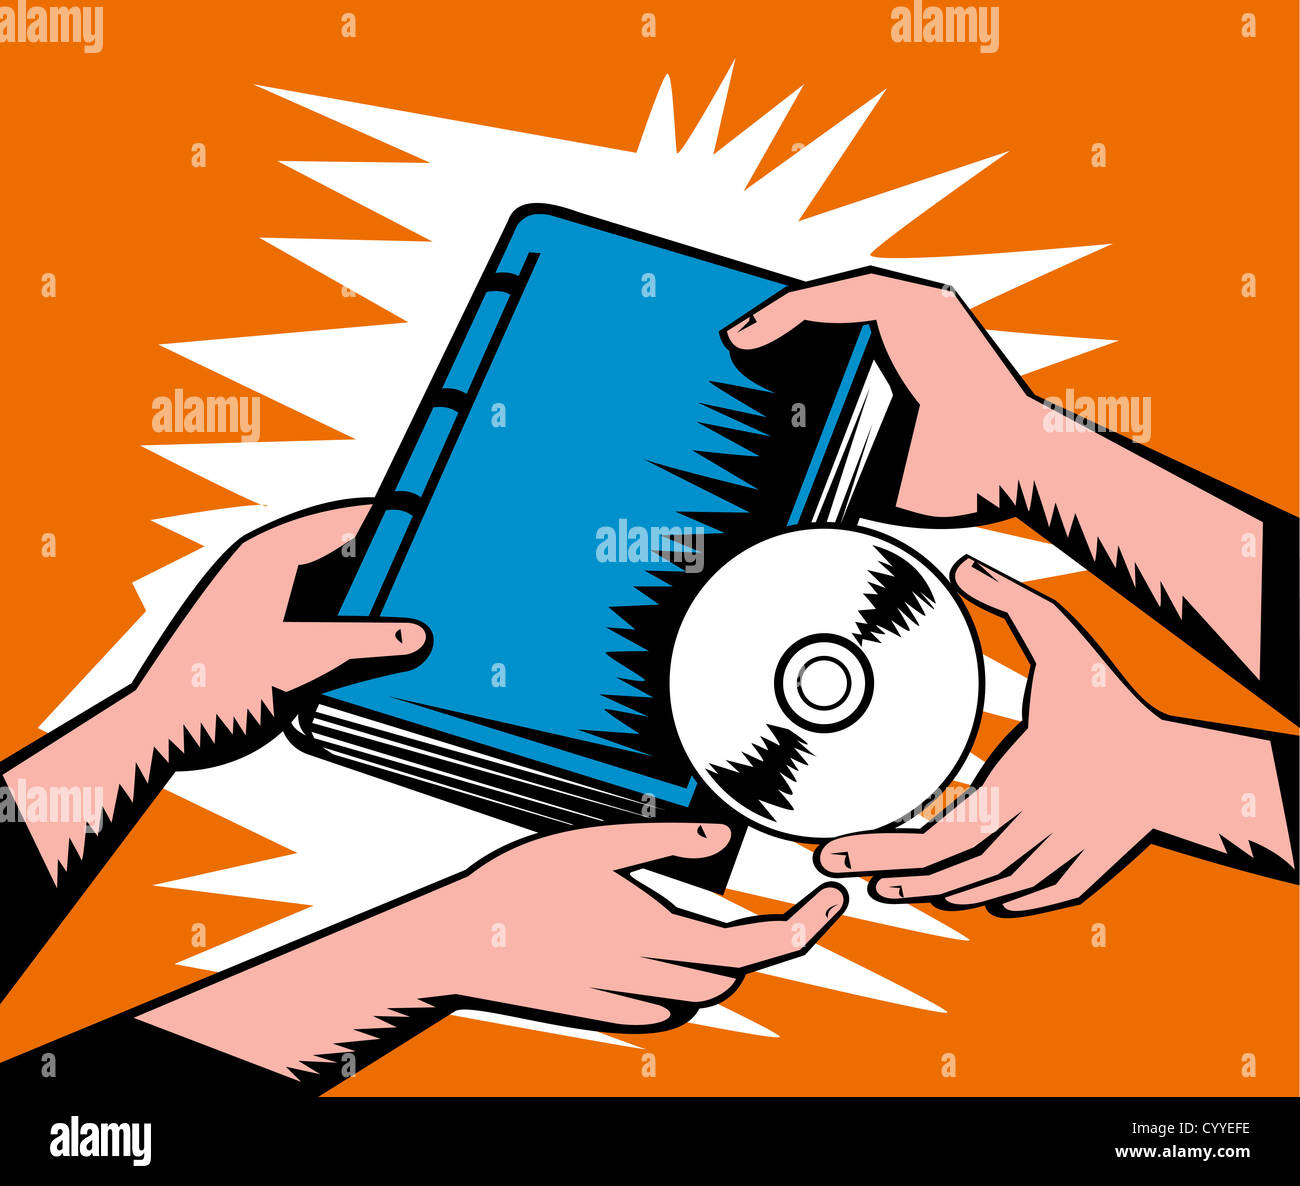 Illustration of two pair of hands exchanging book and cd disk done in retro woodcut style. Stock Photo